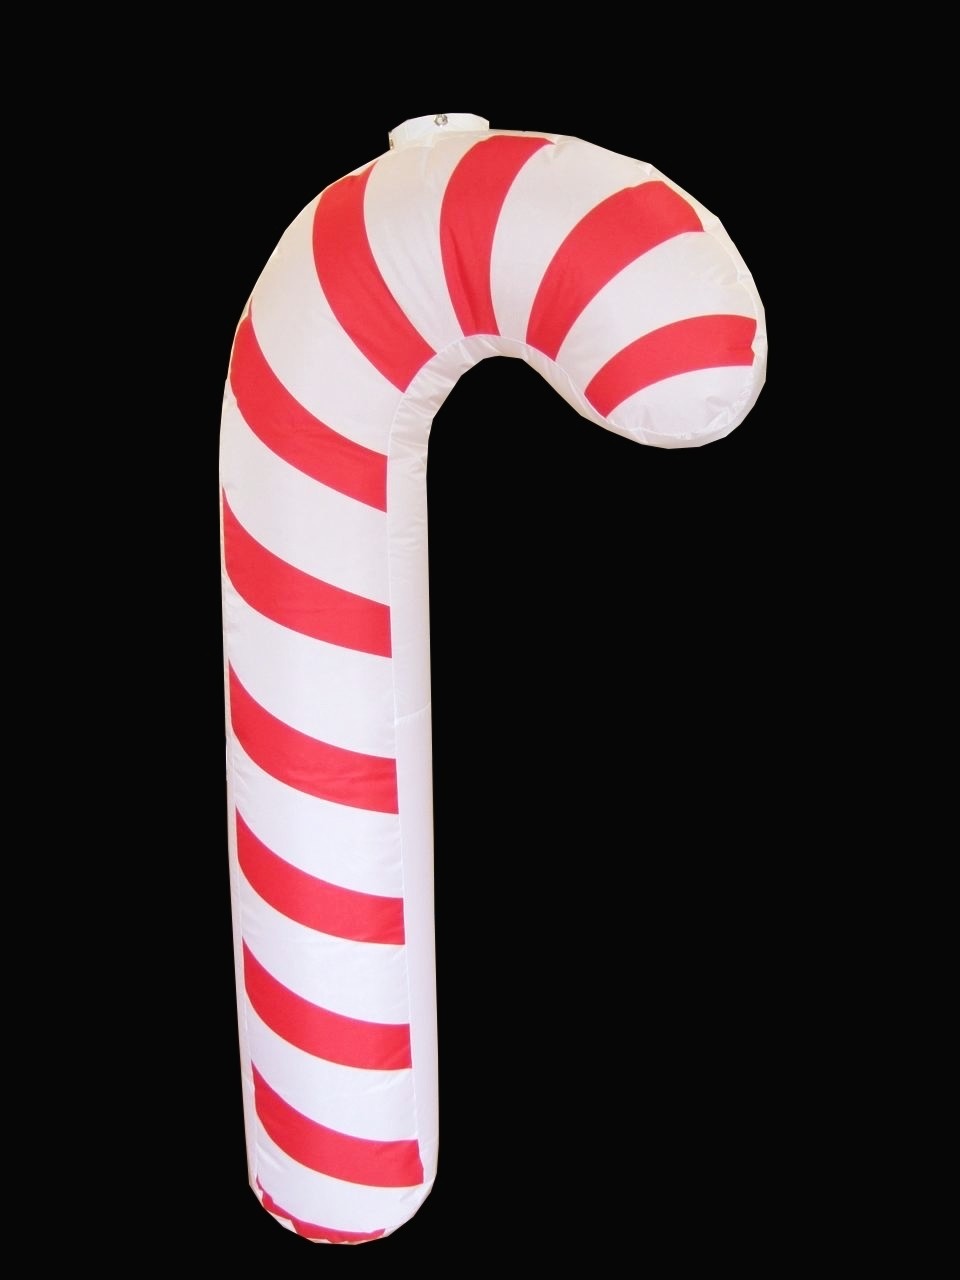 Hanging Inflatable Candy Cane 2.5ft/75cm x 5.2ft/160cm